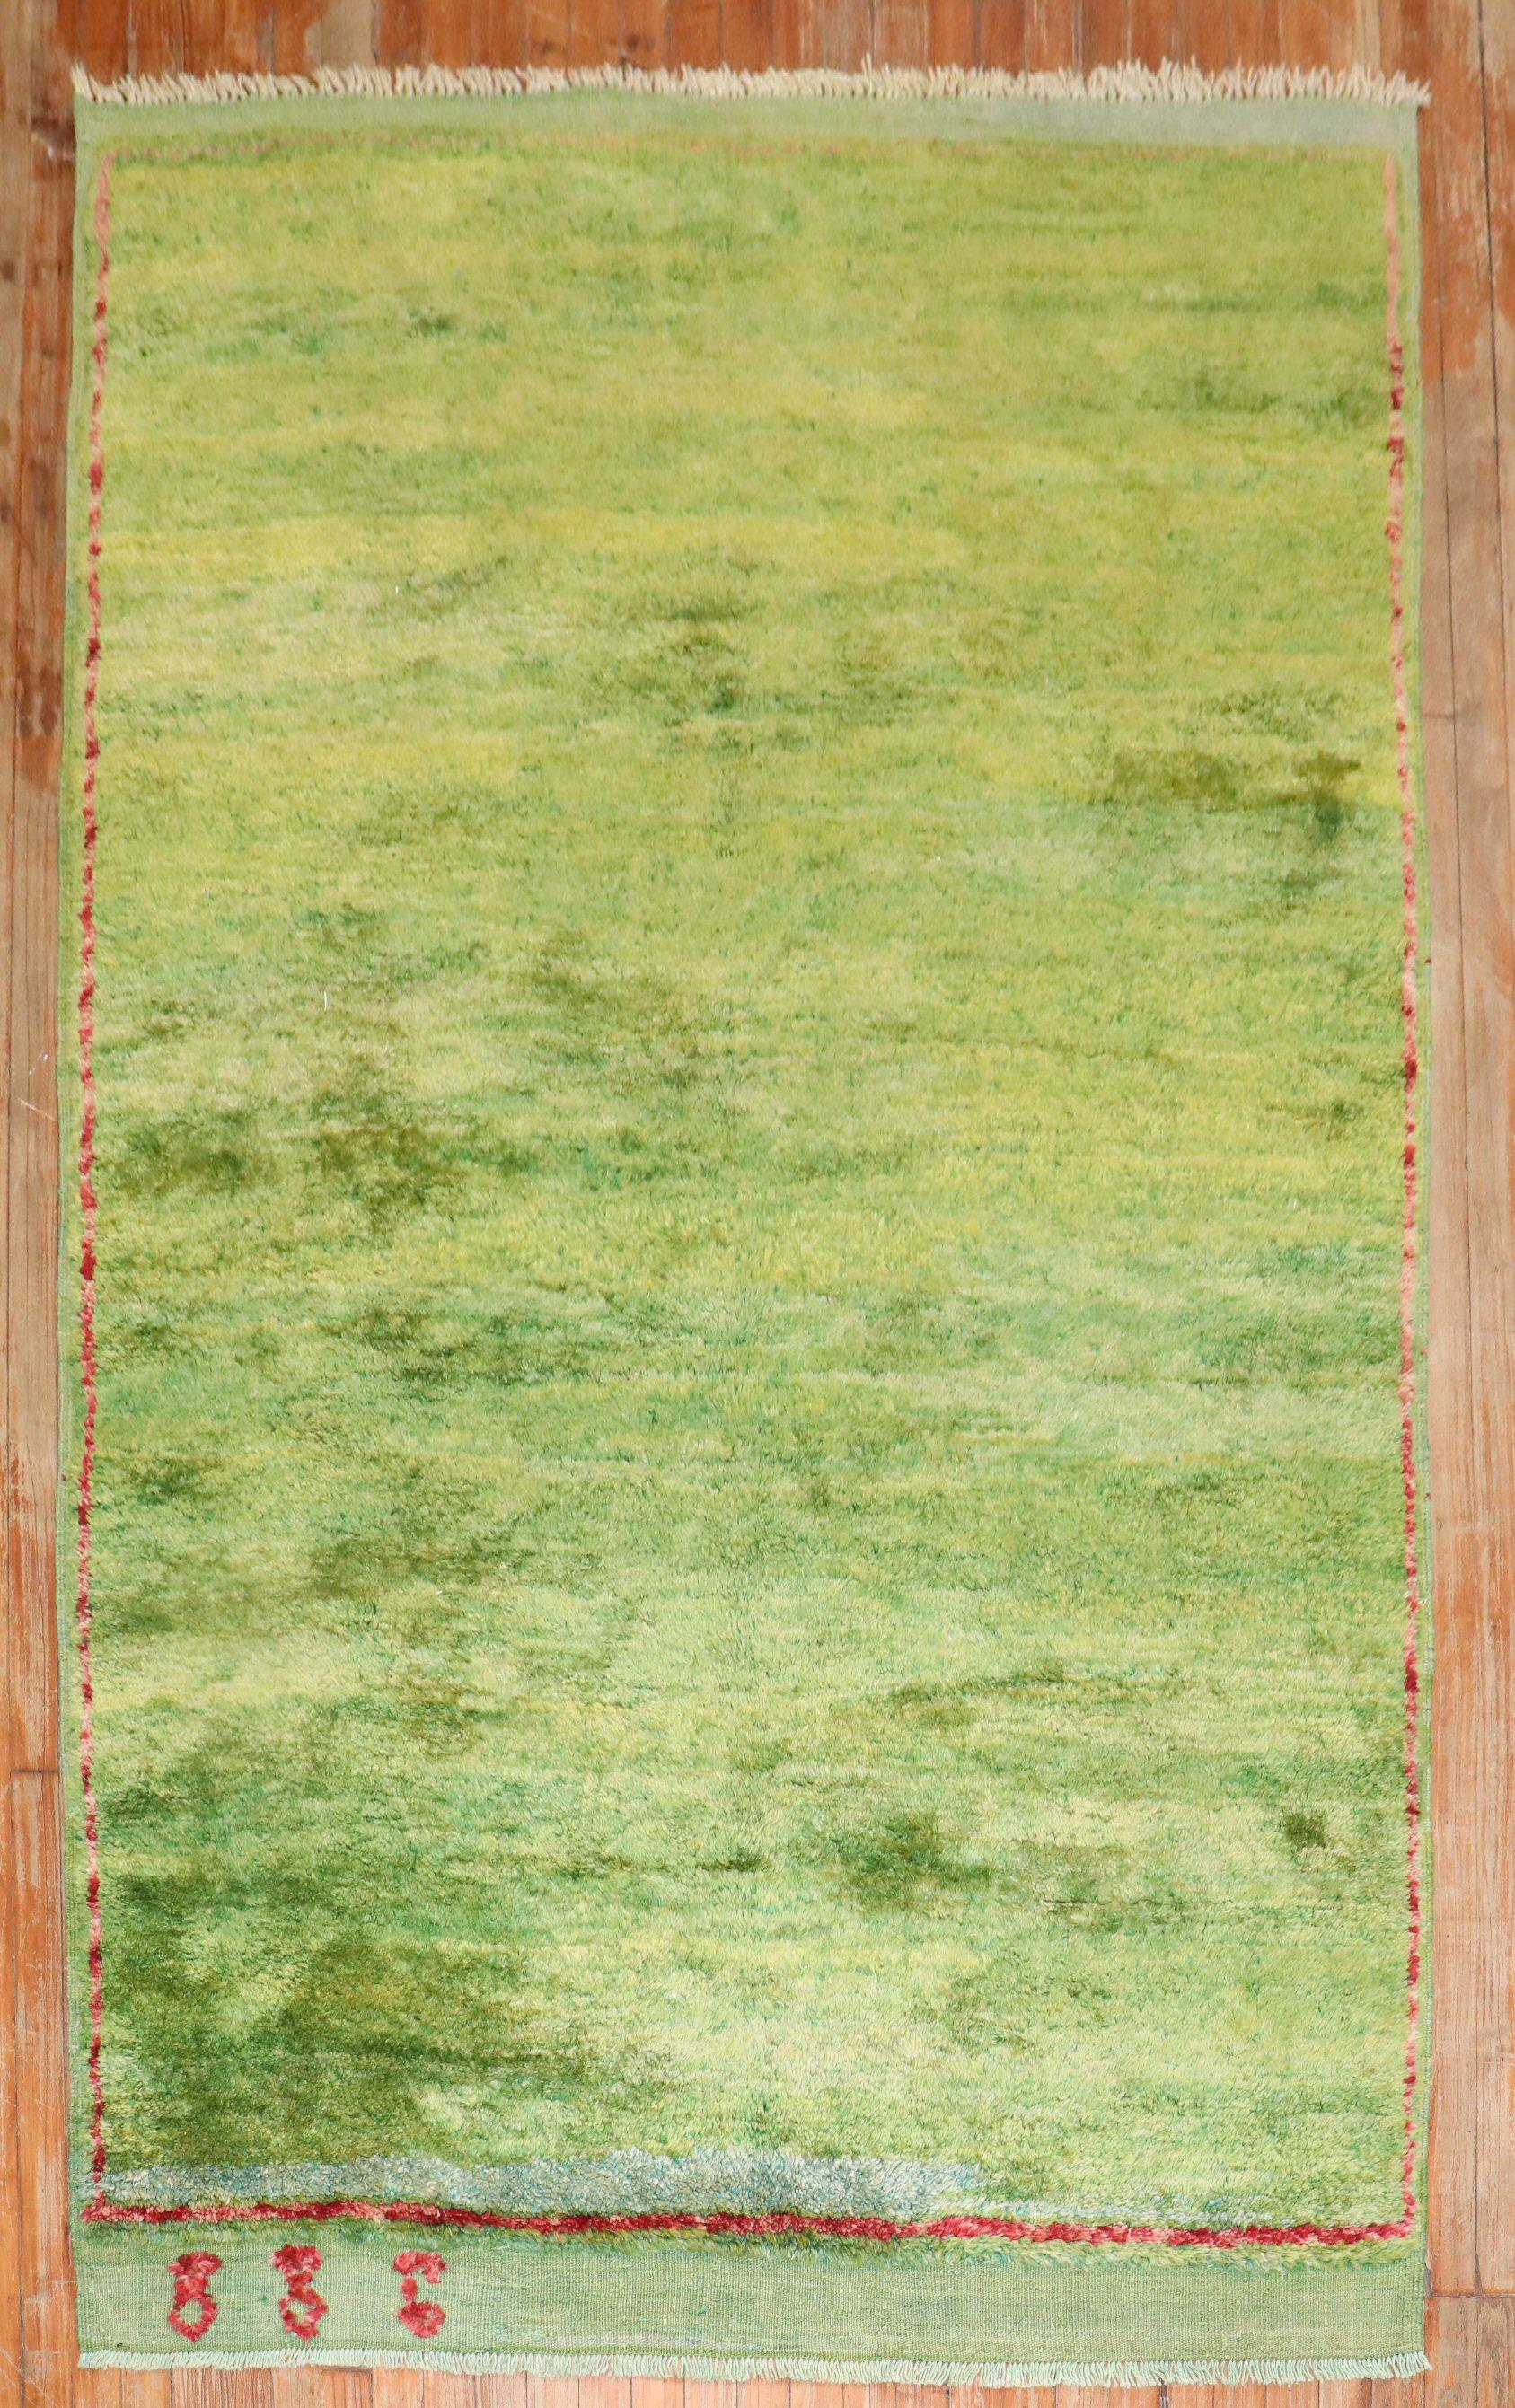 a 3rd quarter of the 20th century one of a kind Turkish Tulu one of a kind rug in predominantly green.

5' x 8'2''

Tulus have been woven in the city of Konya, located in Turkey for centuries, where they were first used as blankets or sleeping